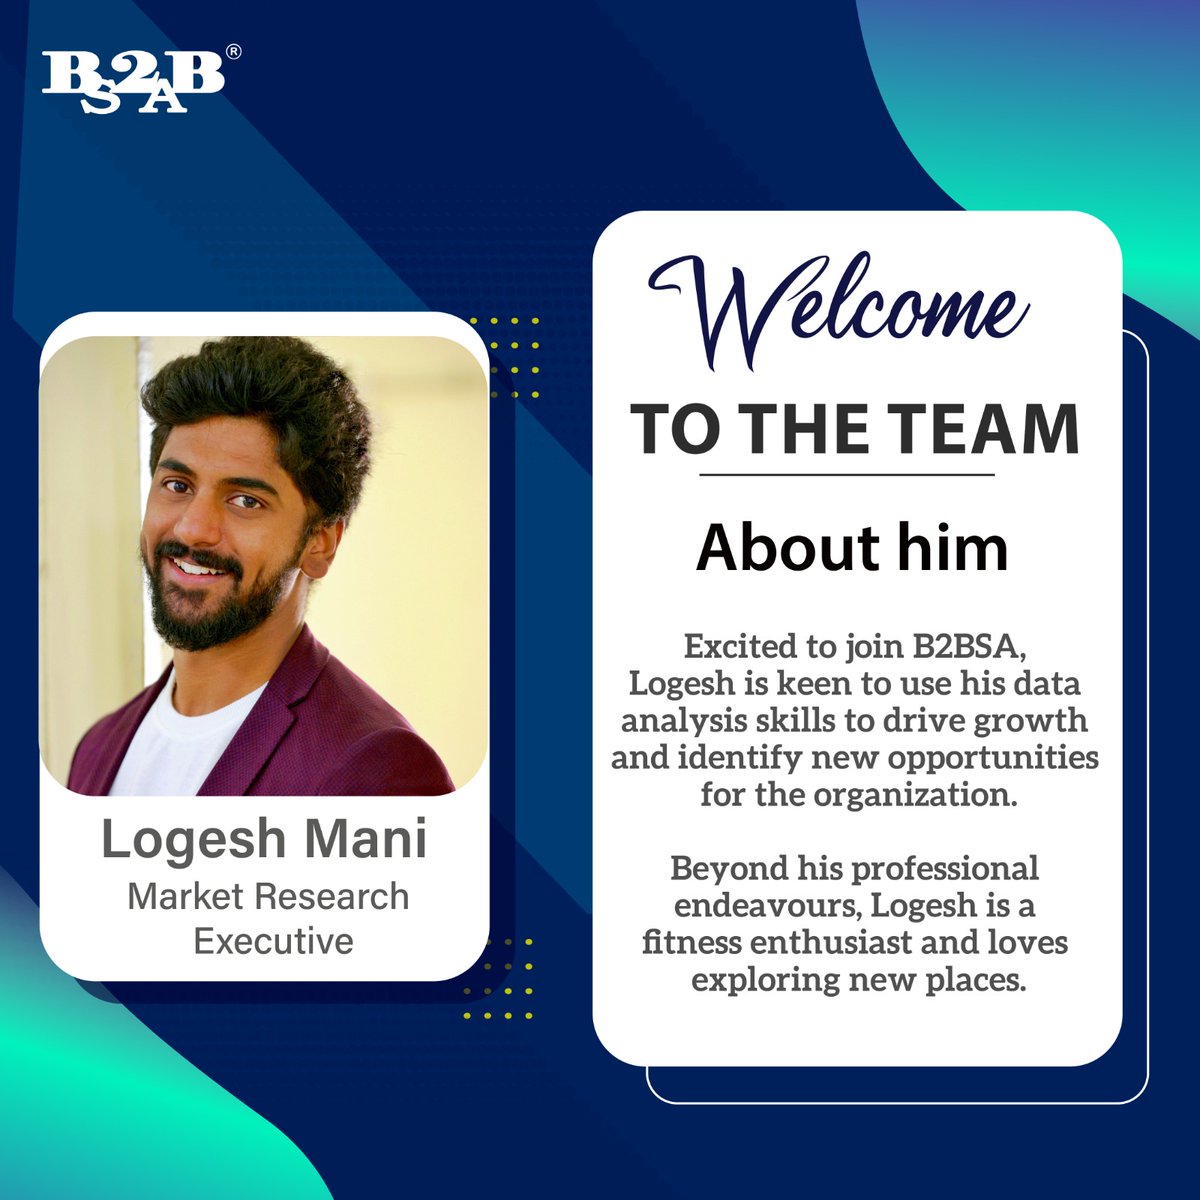 🥁 #WelcomeAboard #NewHire 🎉

We are delighted to #welcome Logesh Mani as Market Research Executive to our growing B2B Sales Arrow family. 

Congratulations, Logesh! We look forward to scaling new heights together! 🥳

#teambuilding #newteammate #marketresearch #b2bsalesarrow